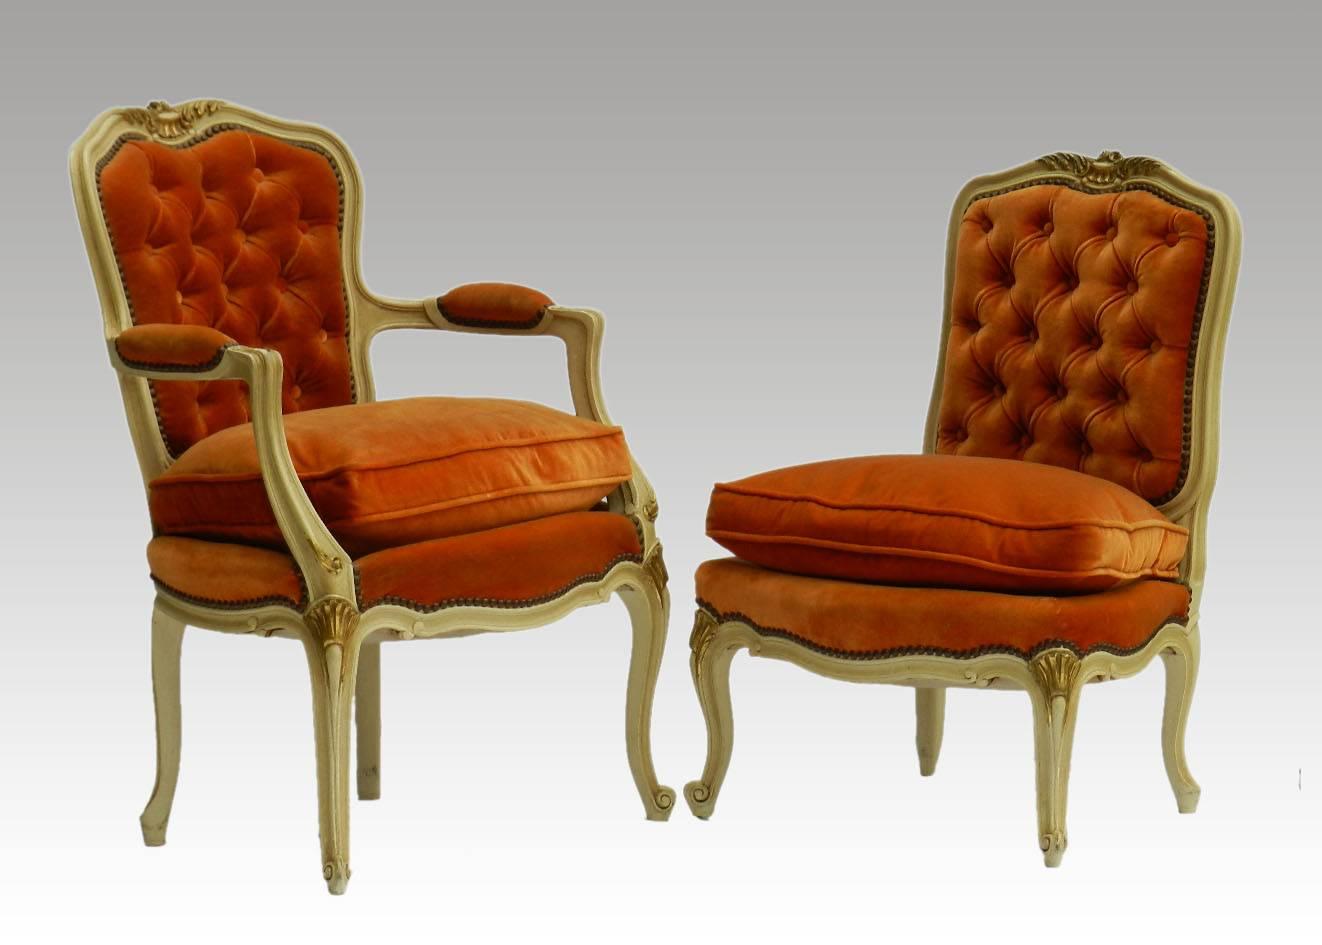 Two French Chairs Armchair & Boudoir Louis XV revival Tufted Button Back  1